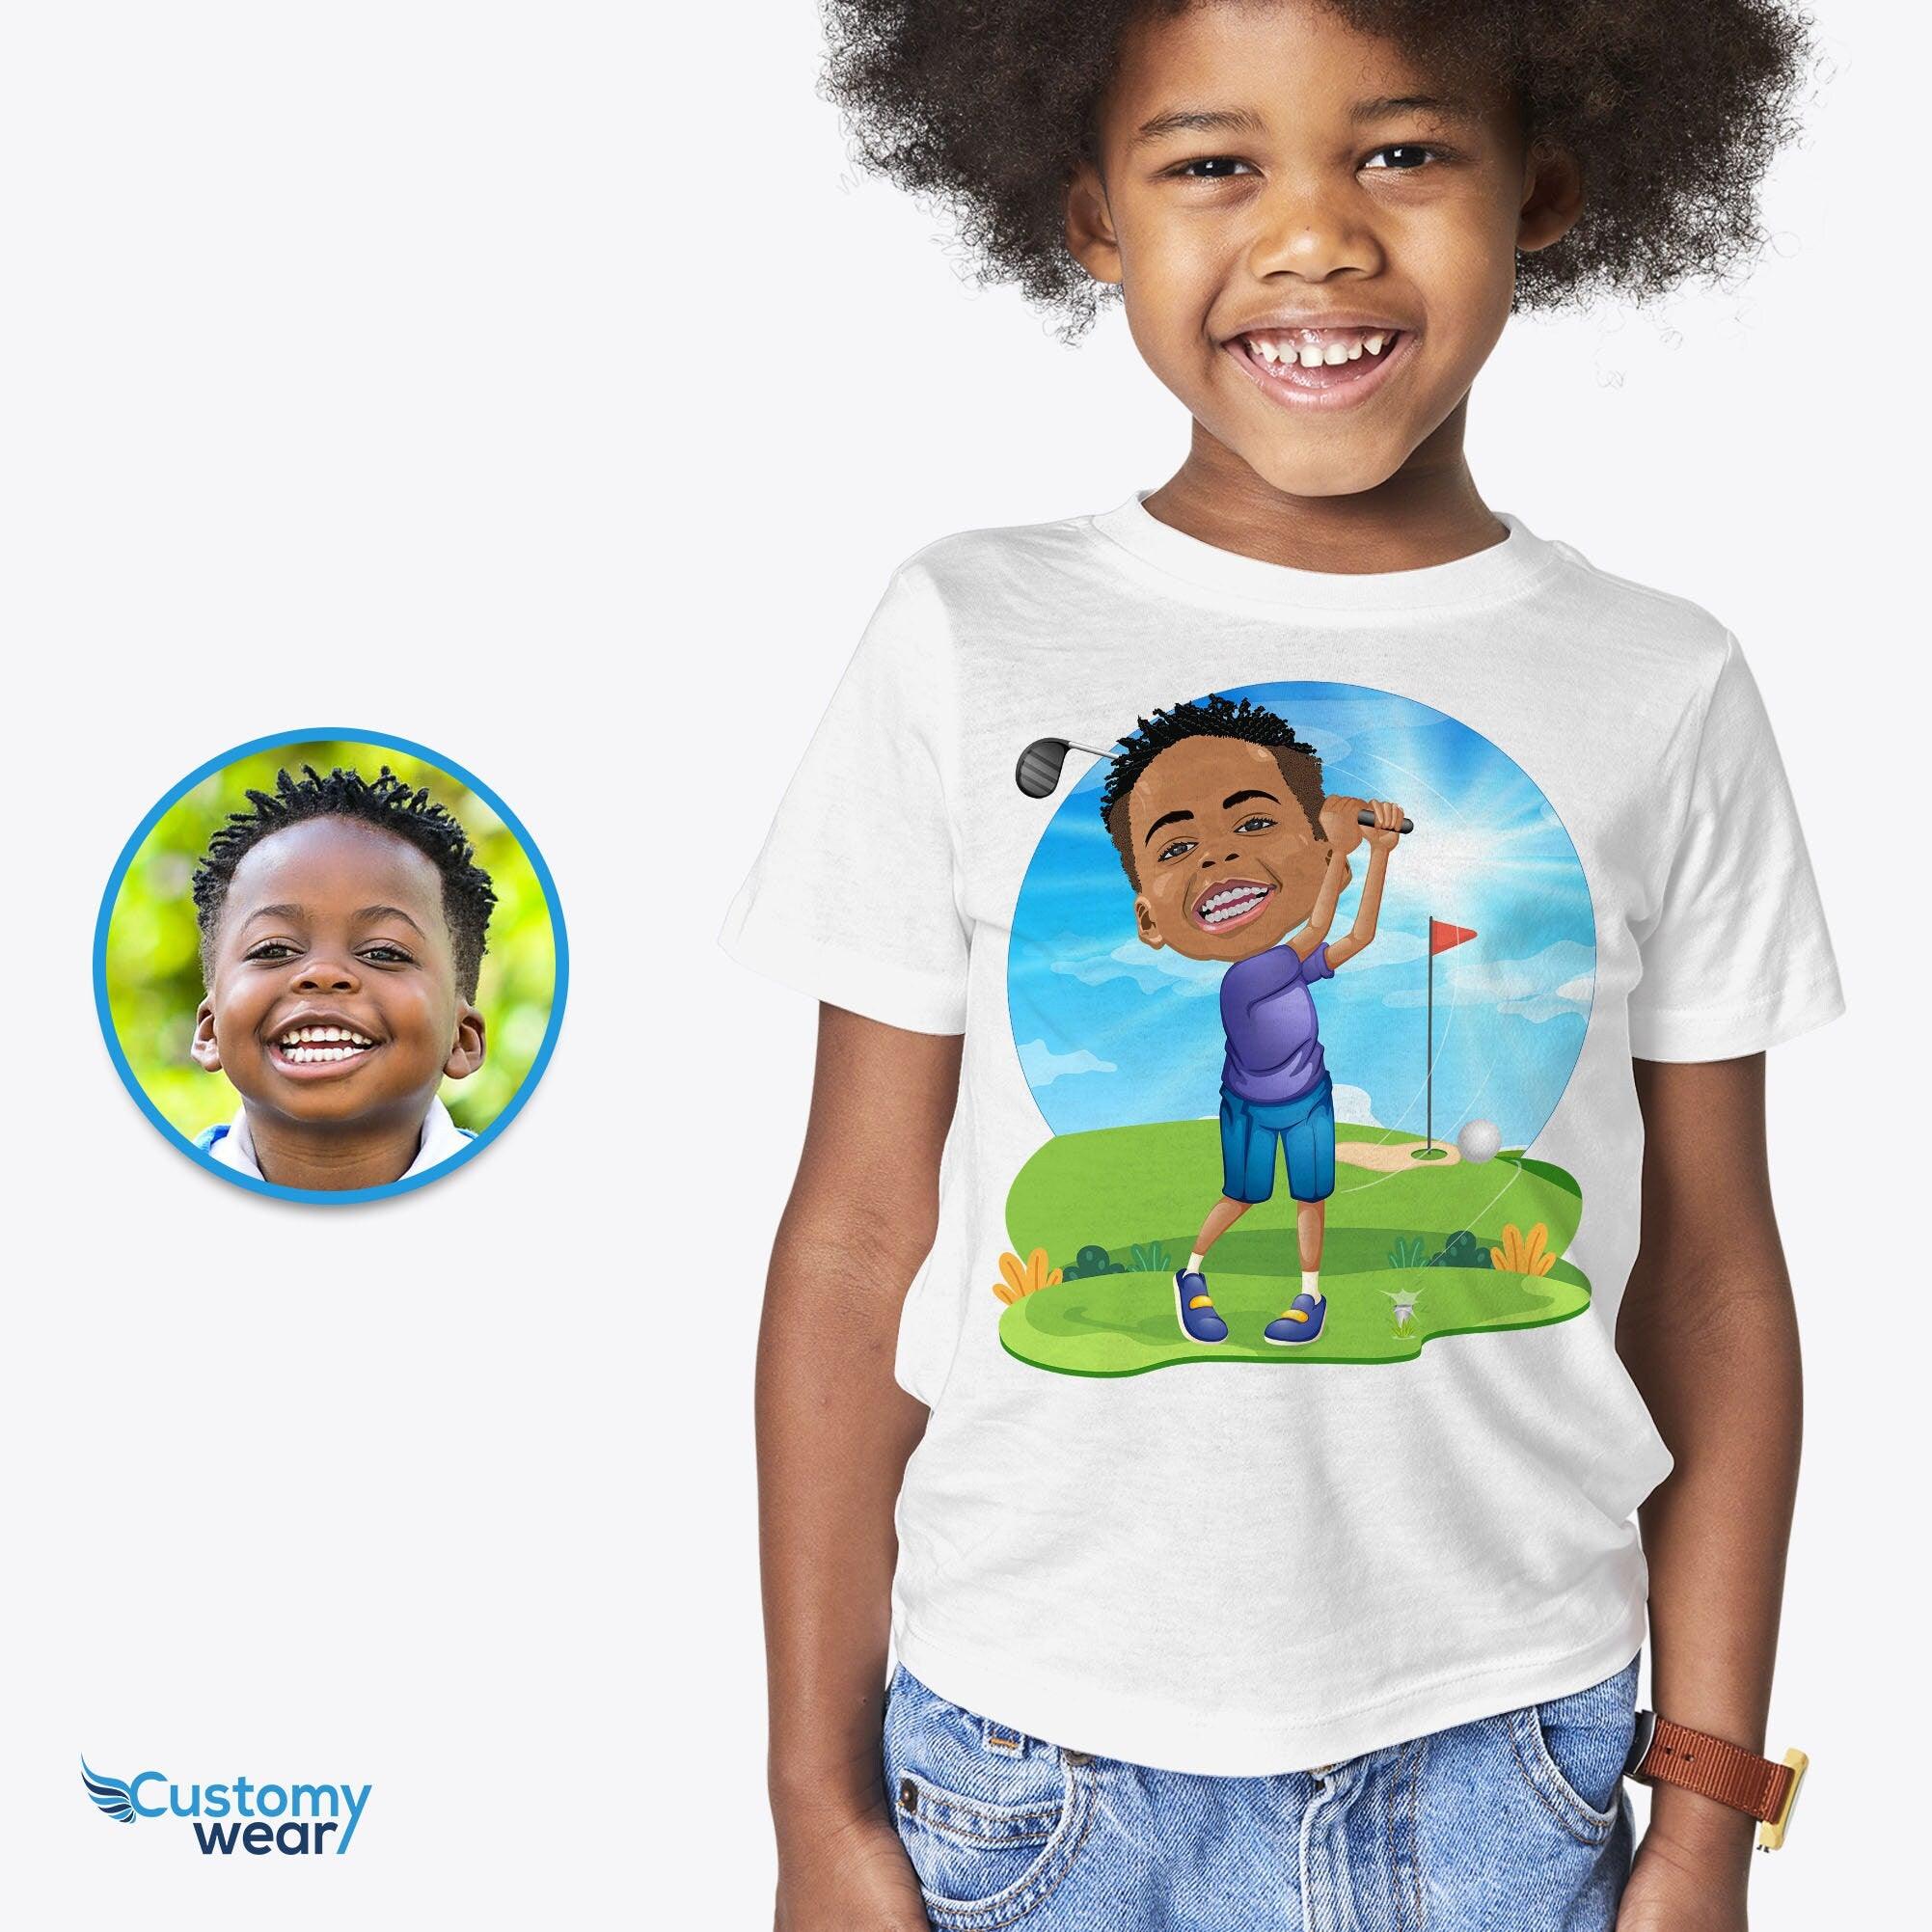 Golfing boy shirt - Young kid outdoor sports playing golf tee CustomyWear boy, golf, golf_gifts, golf_shirt, Golfing_shirt, kid, Kids, kids_birthday_shirt, relatedt4_recommen